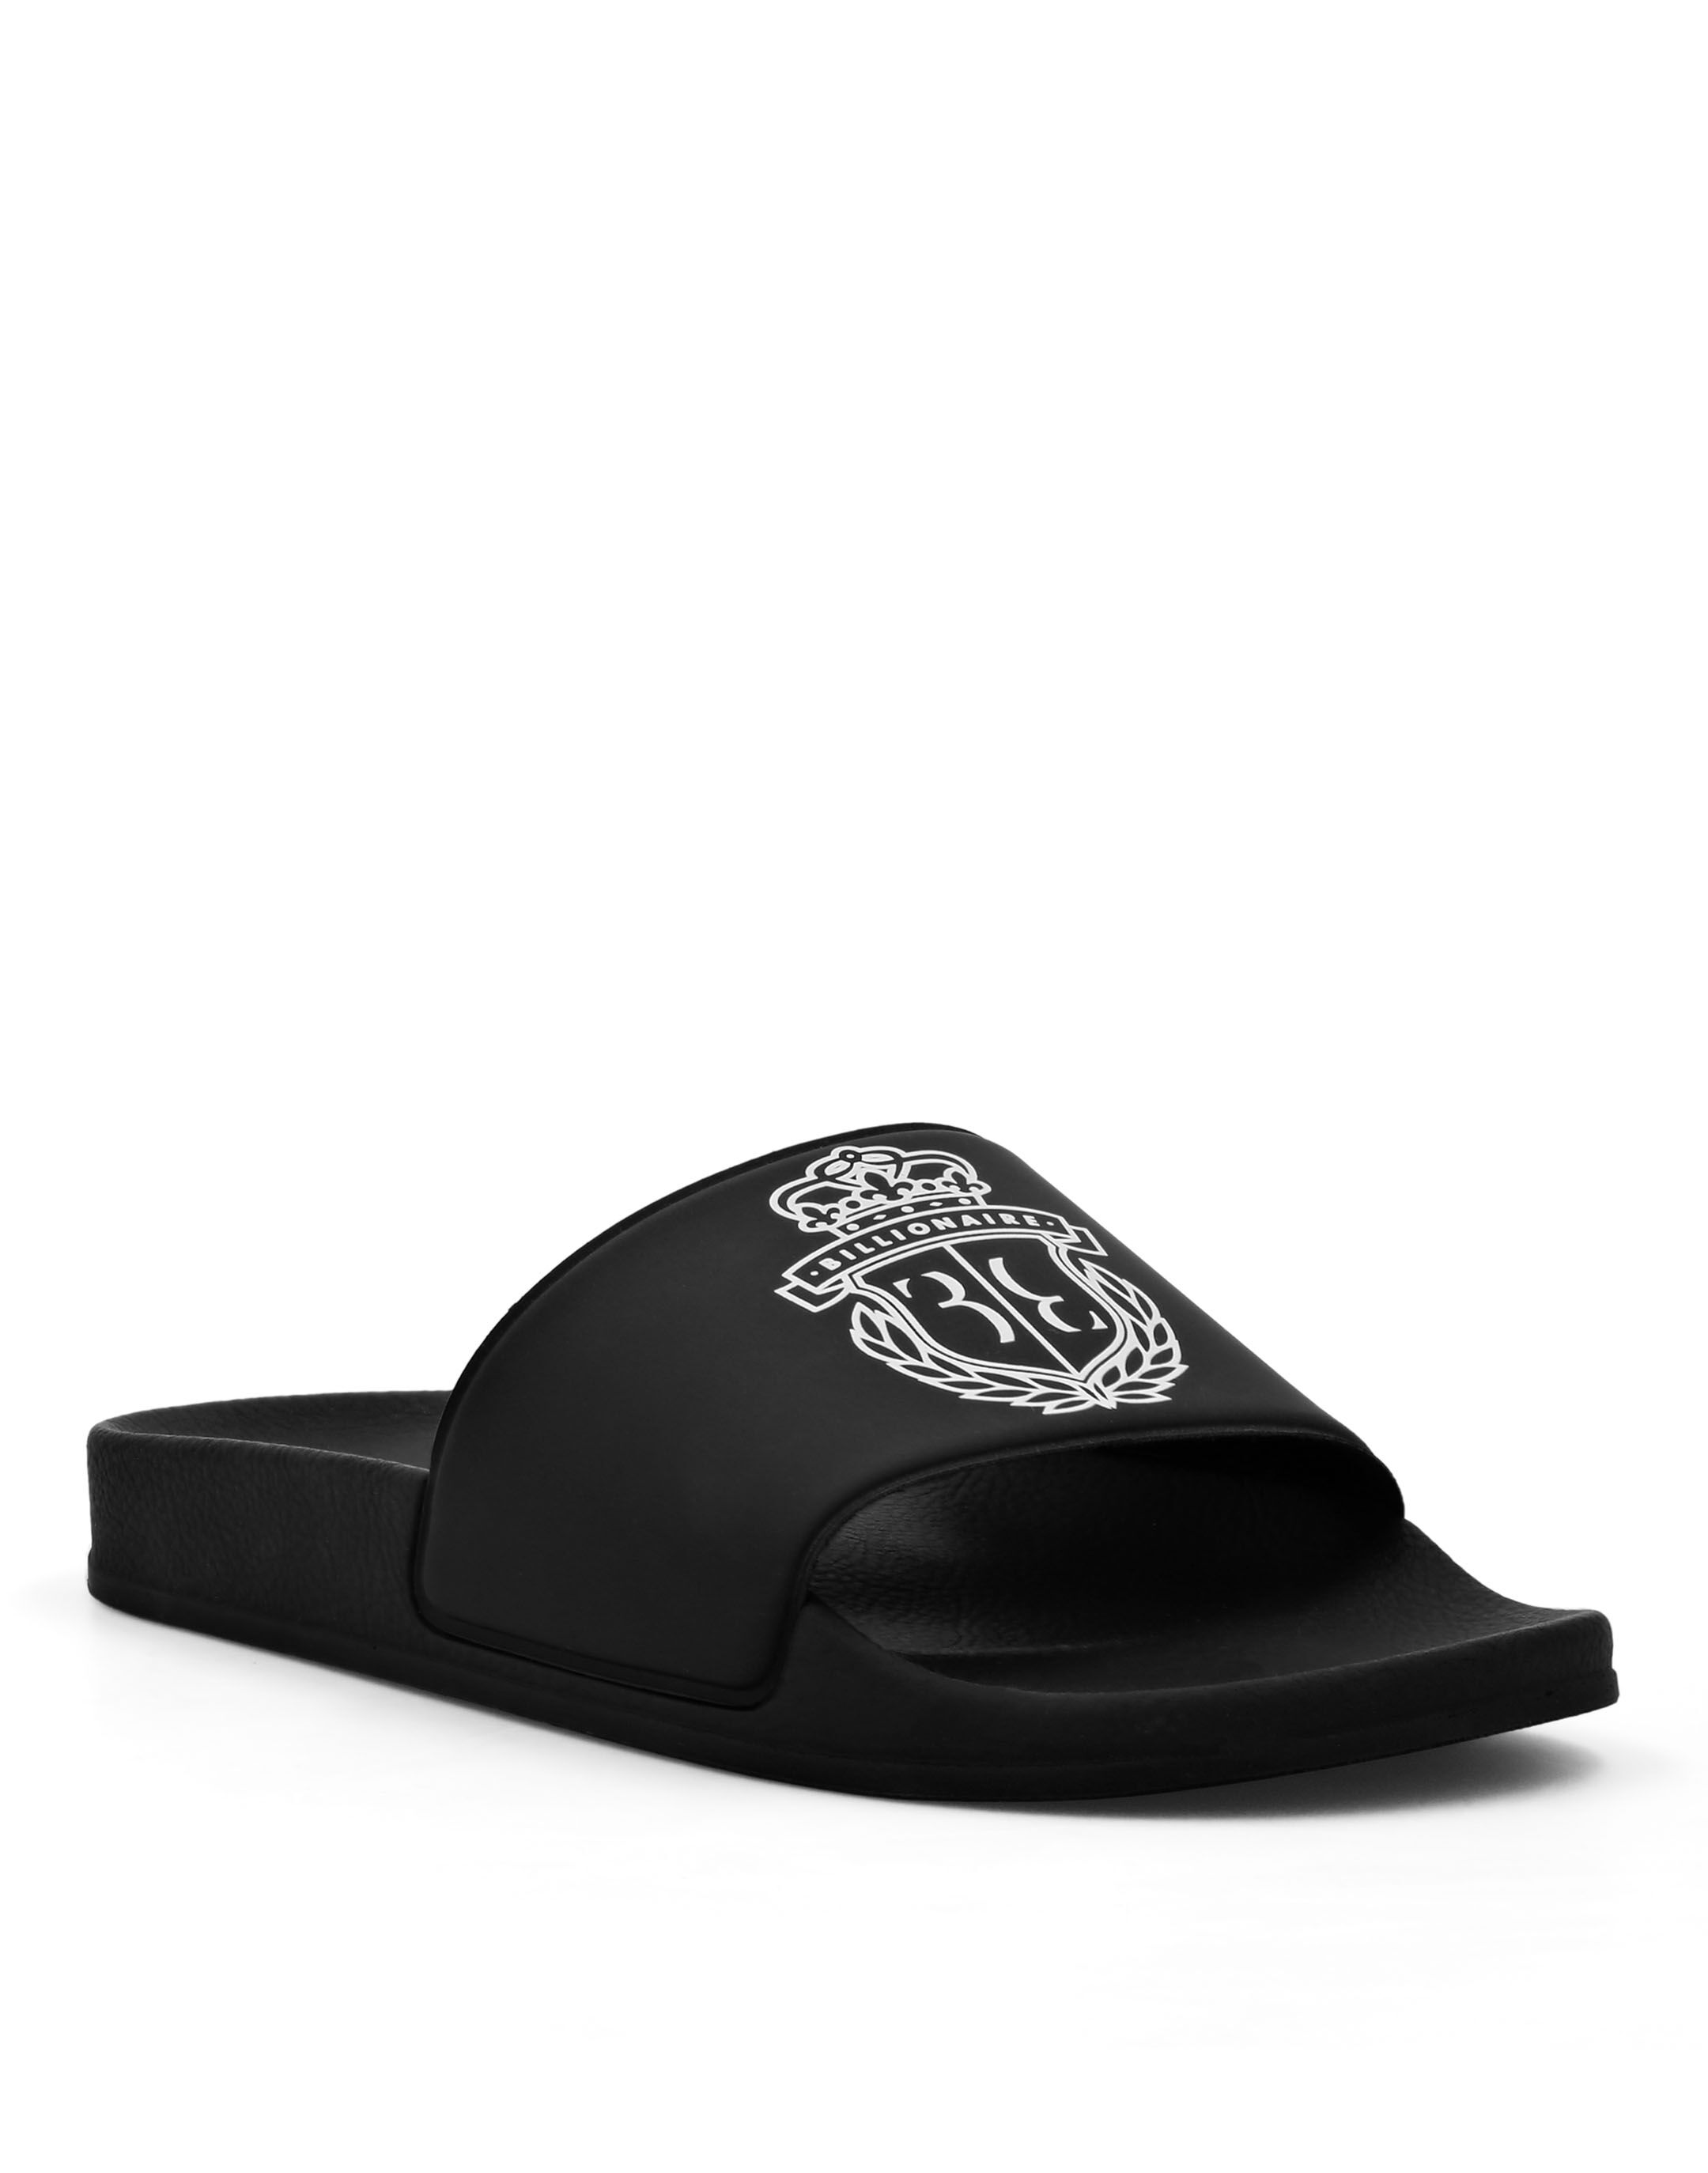 Love this boot | Brown Rubber slides Versace - GenesinlifeShops Canada